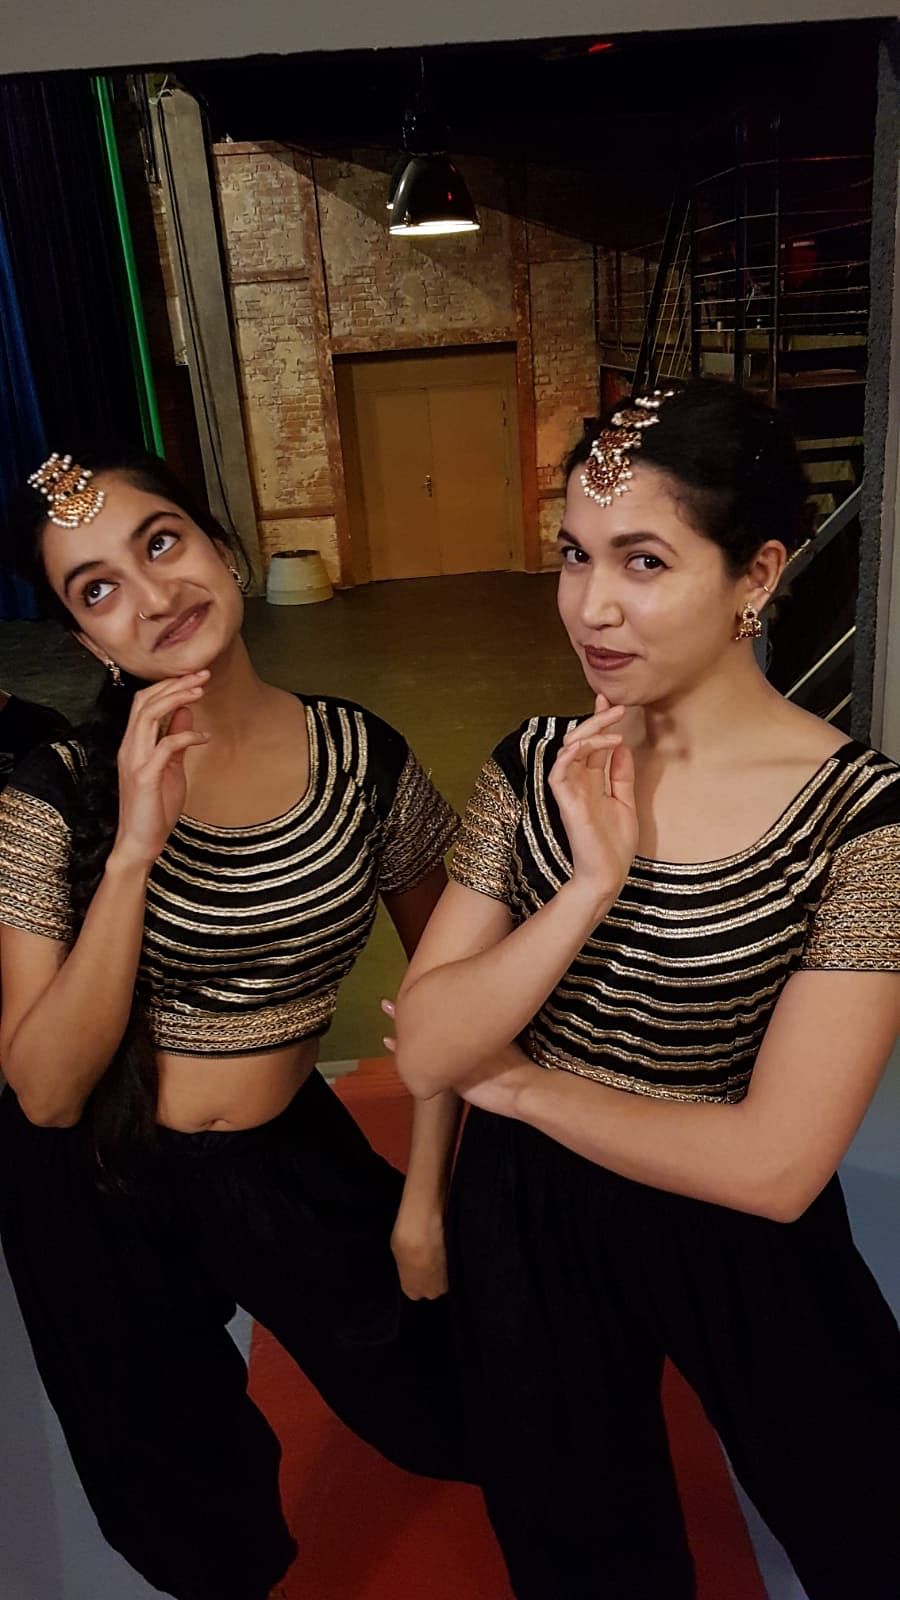 “I even had the courage to launch my own Bhangra classes, which were welcomed,” an Indian dancer in Paris explains.